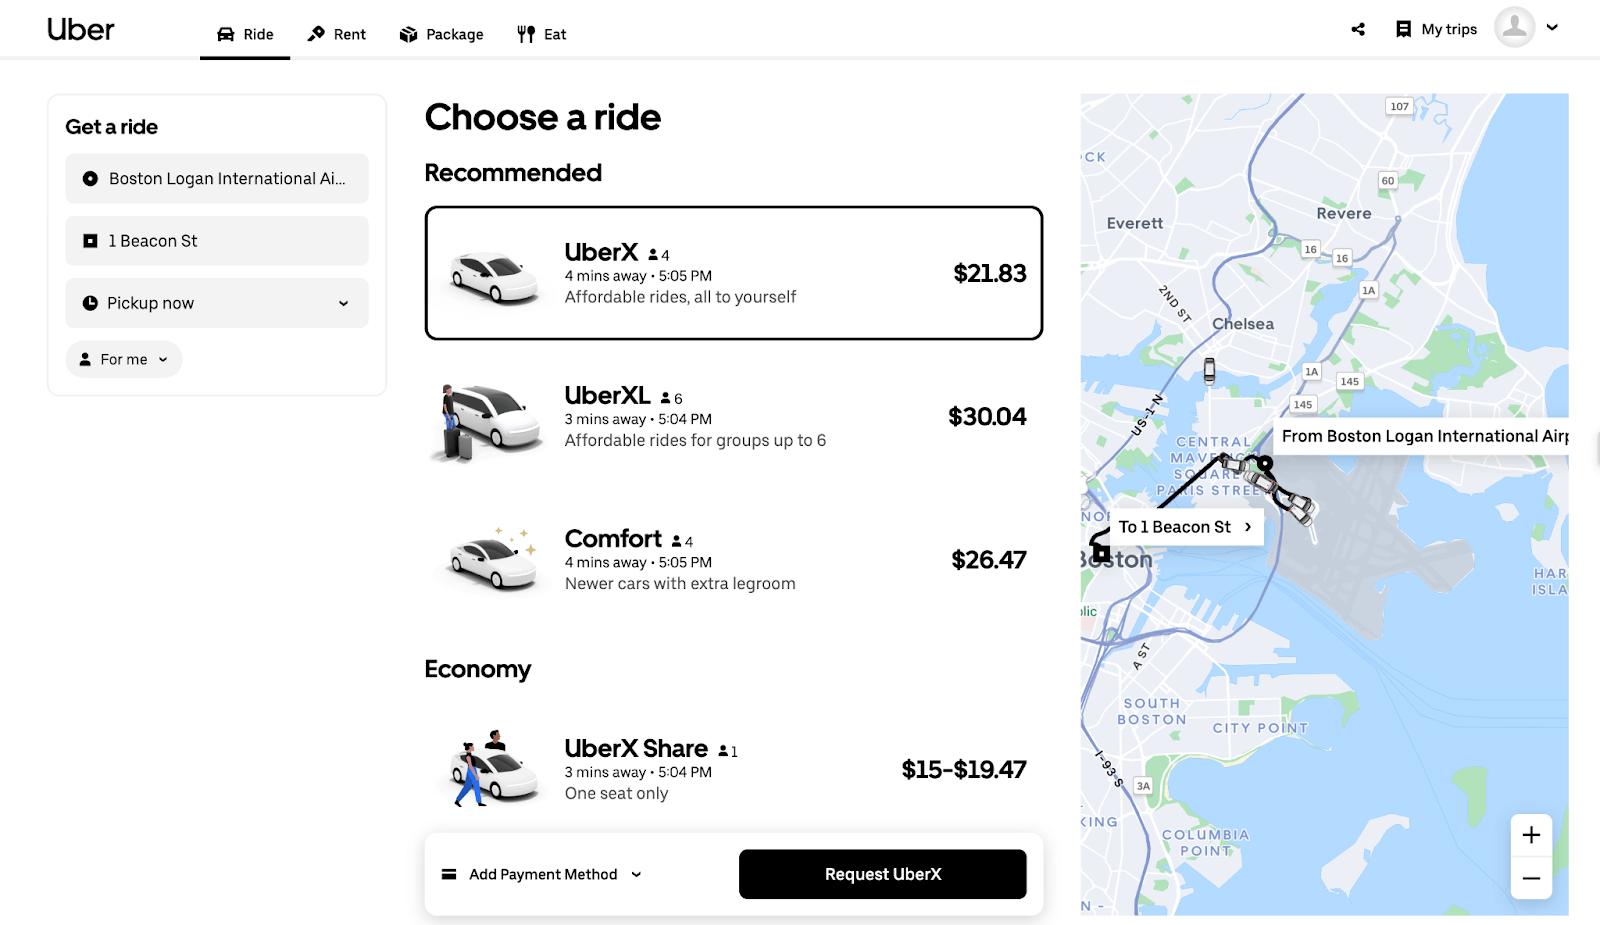 A screenshot of Uber options from the Boston Logan International Airport to a destination in the city.